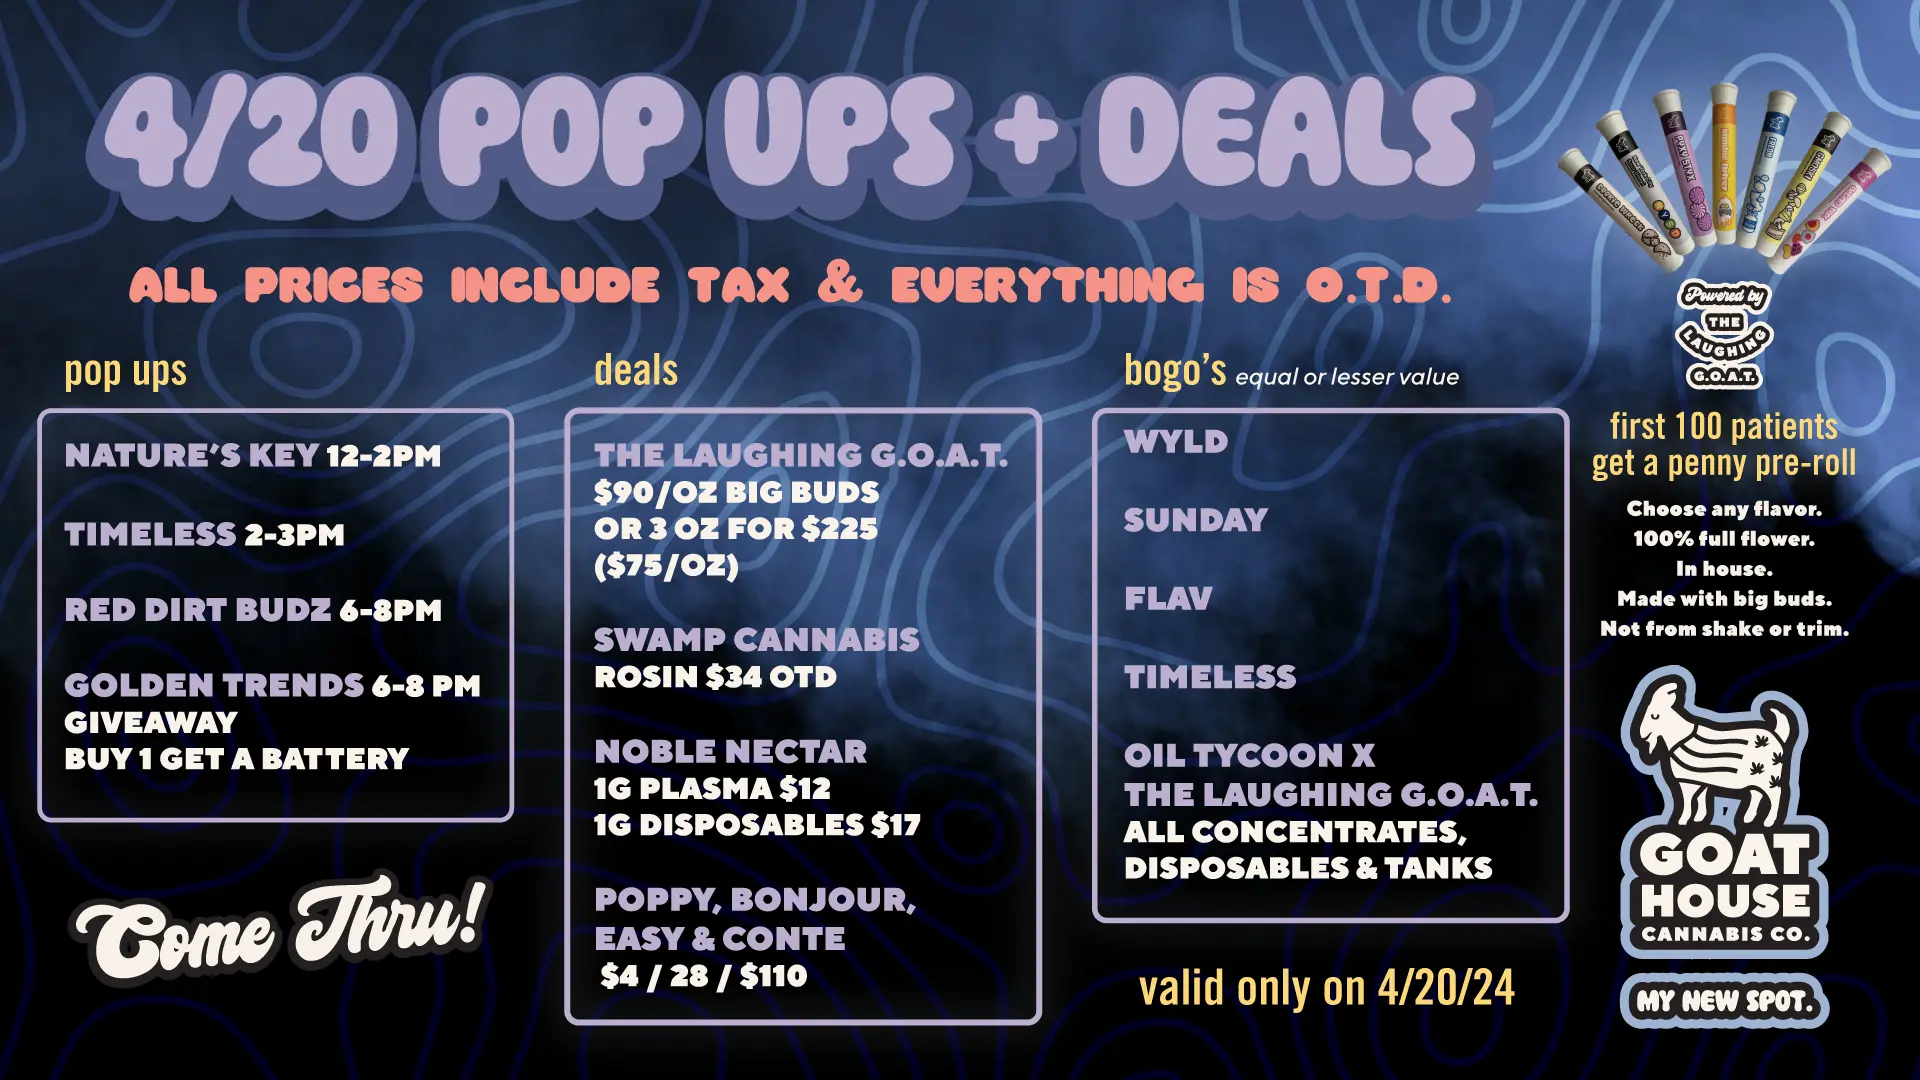 Goat House day of 4/20 deals with pop-ups